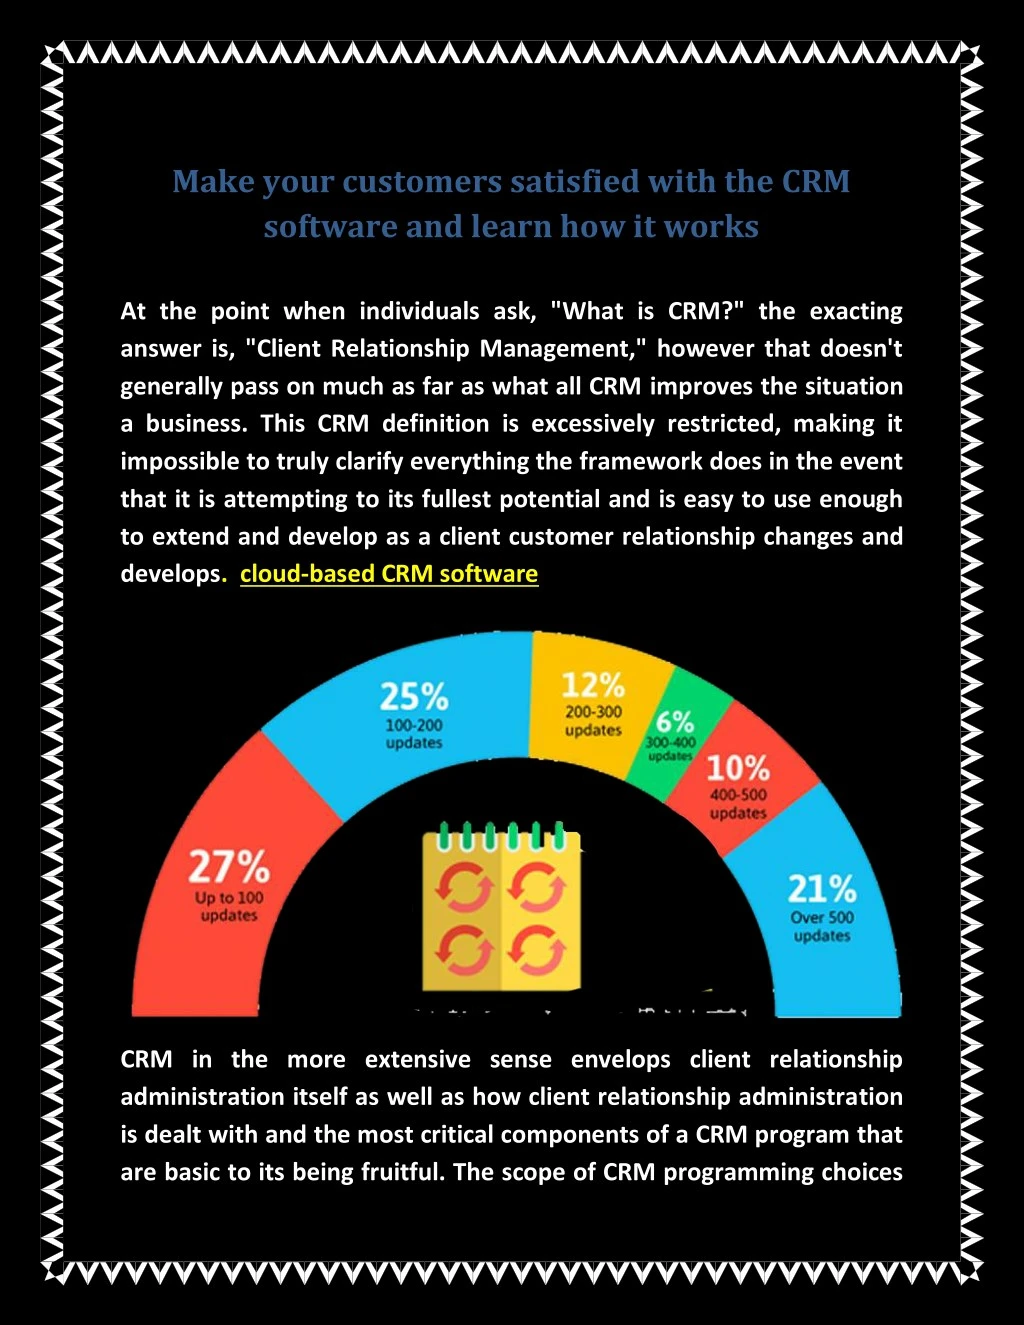 make your customers satisfied with